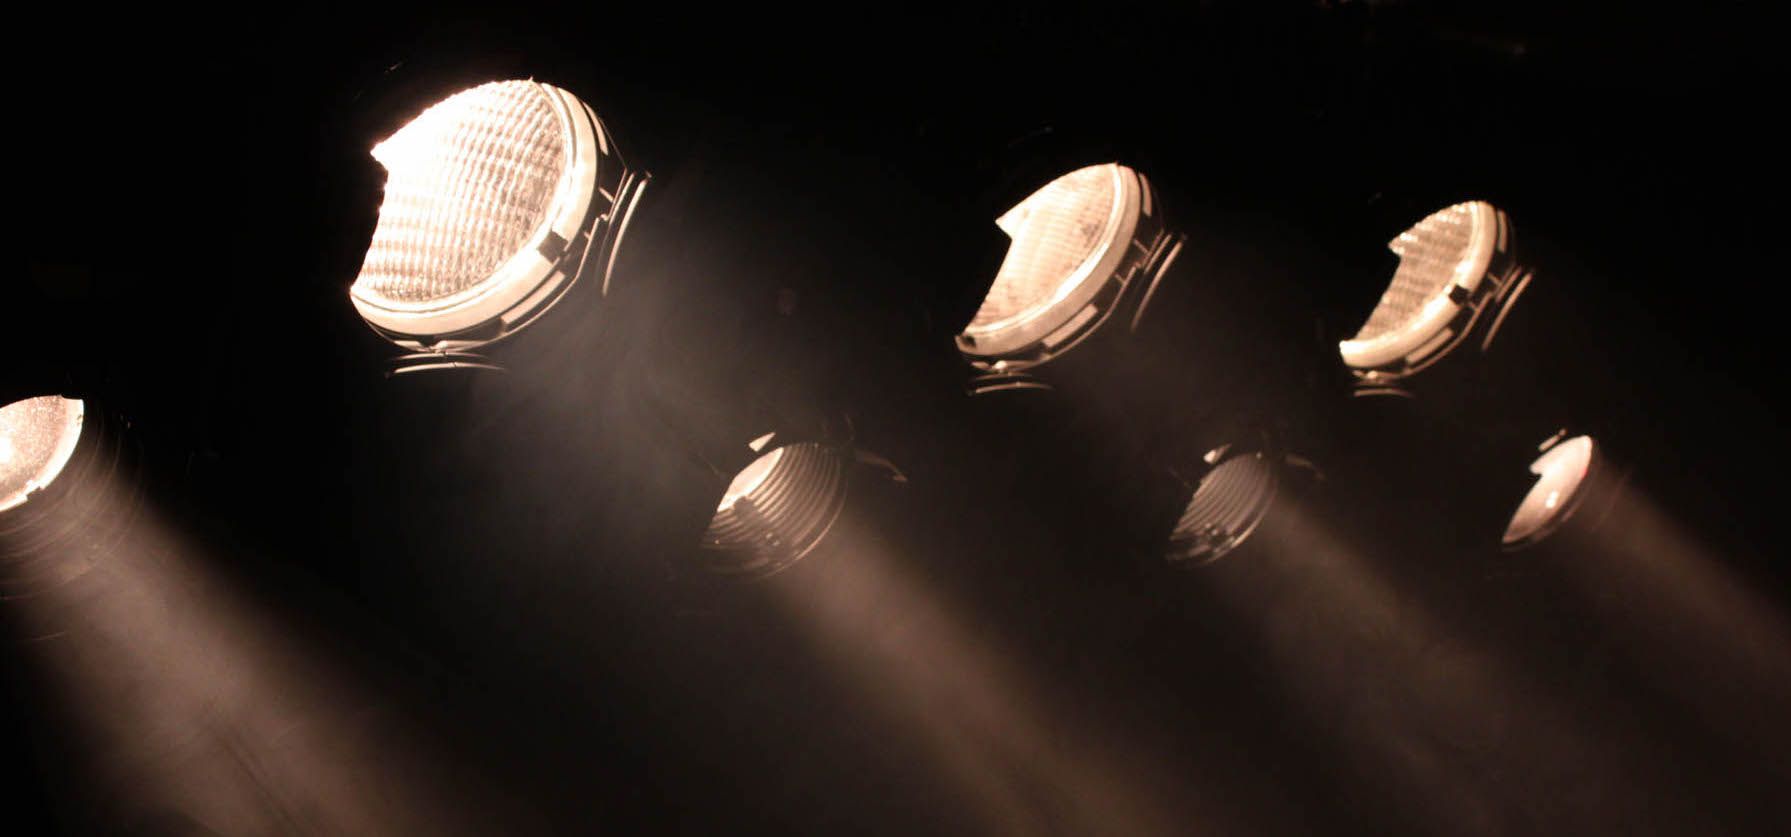 An image of conventional lighting